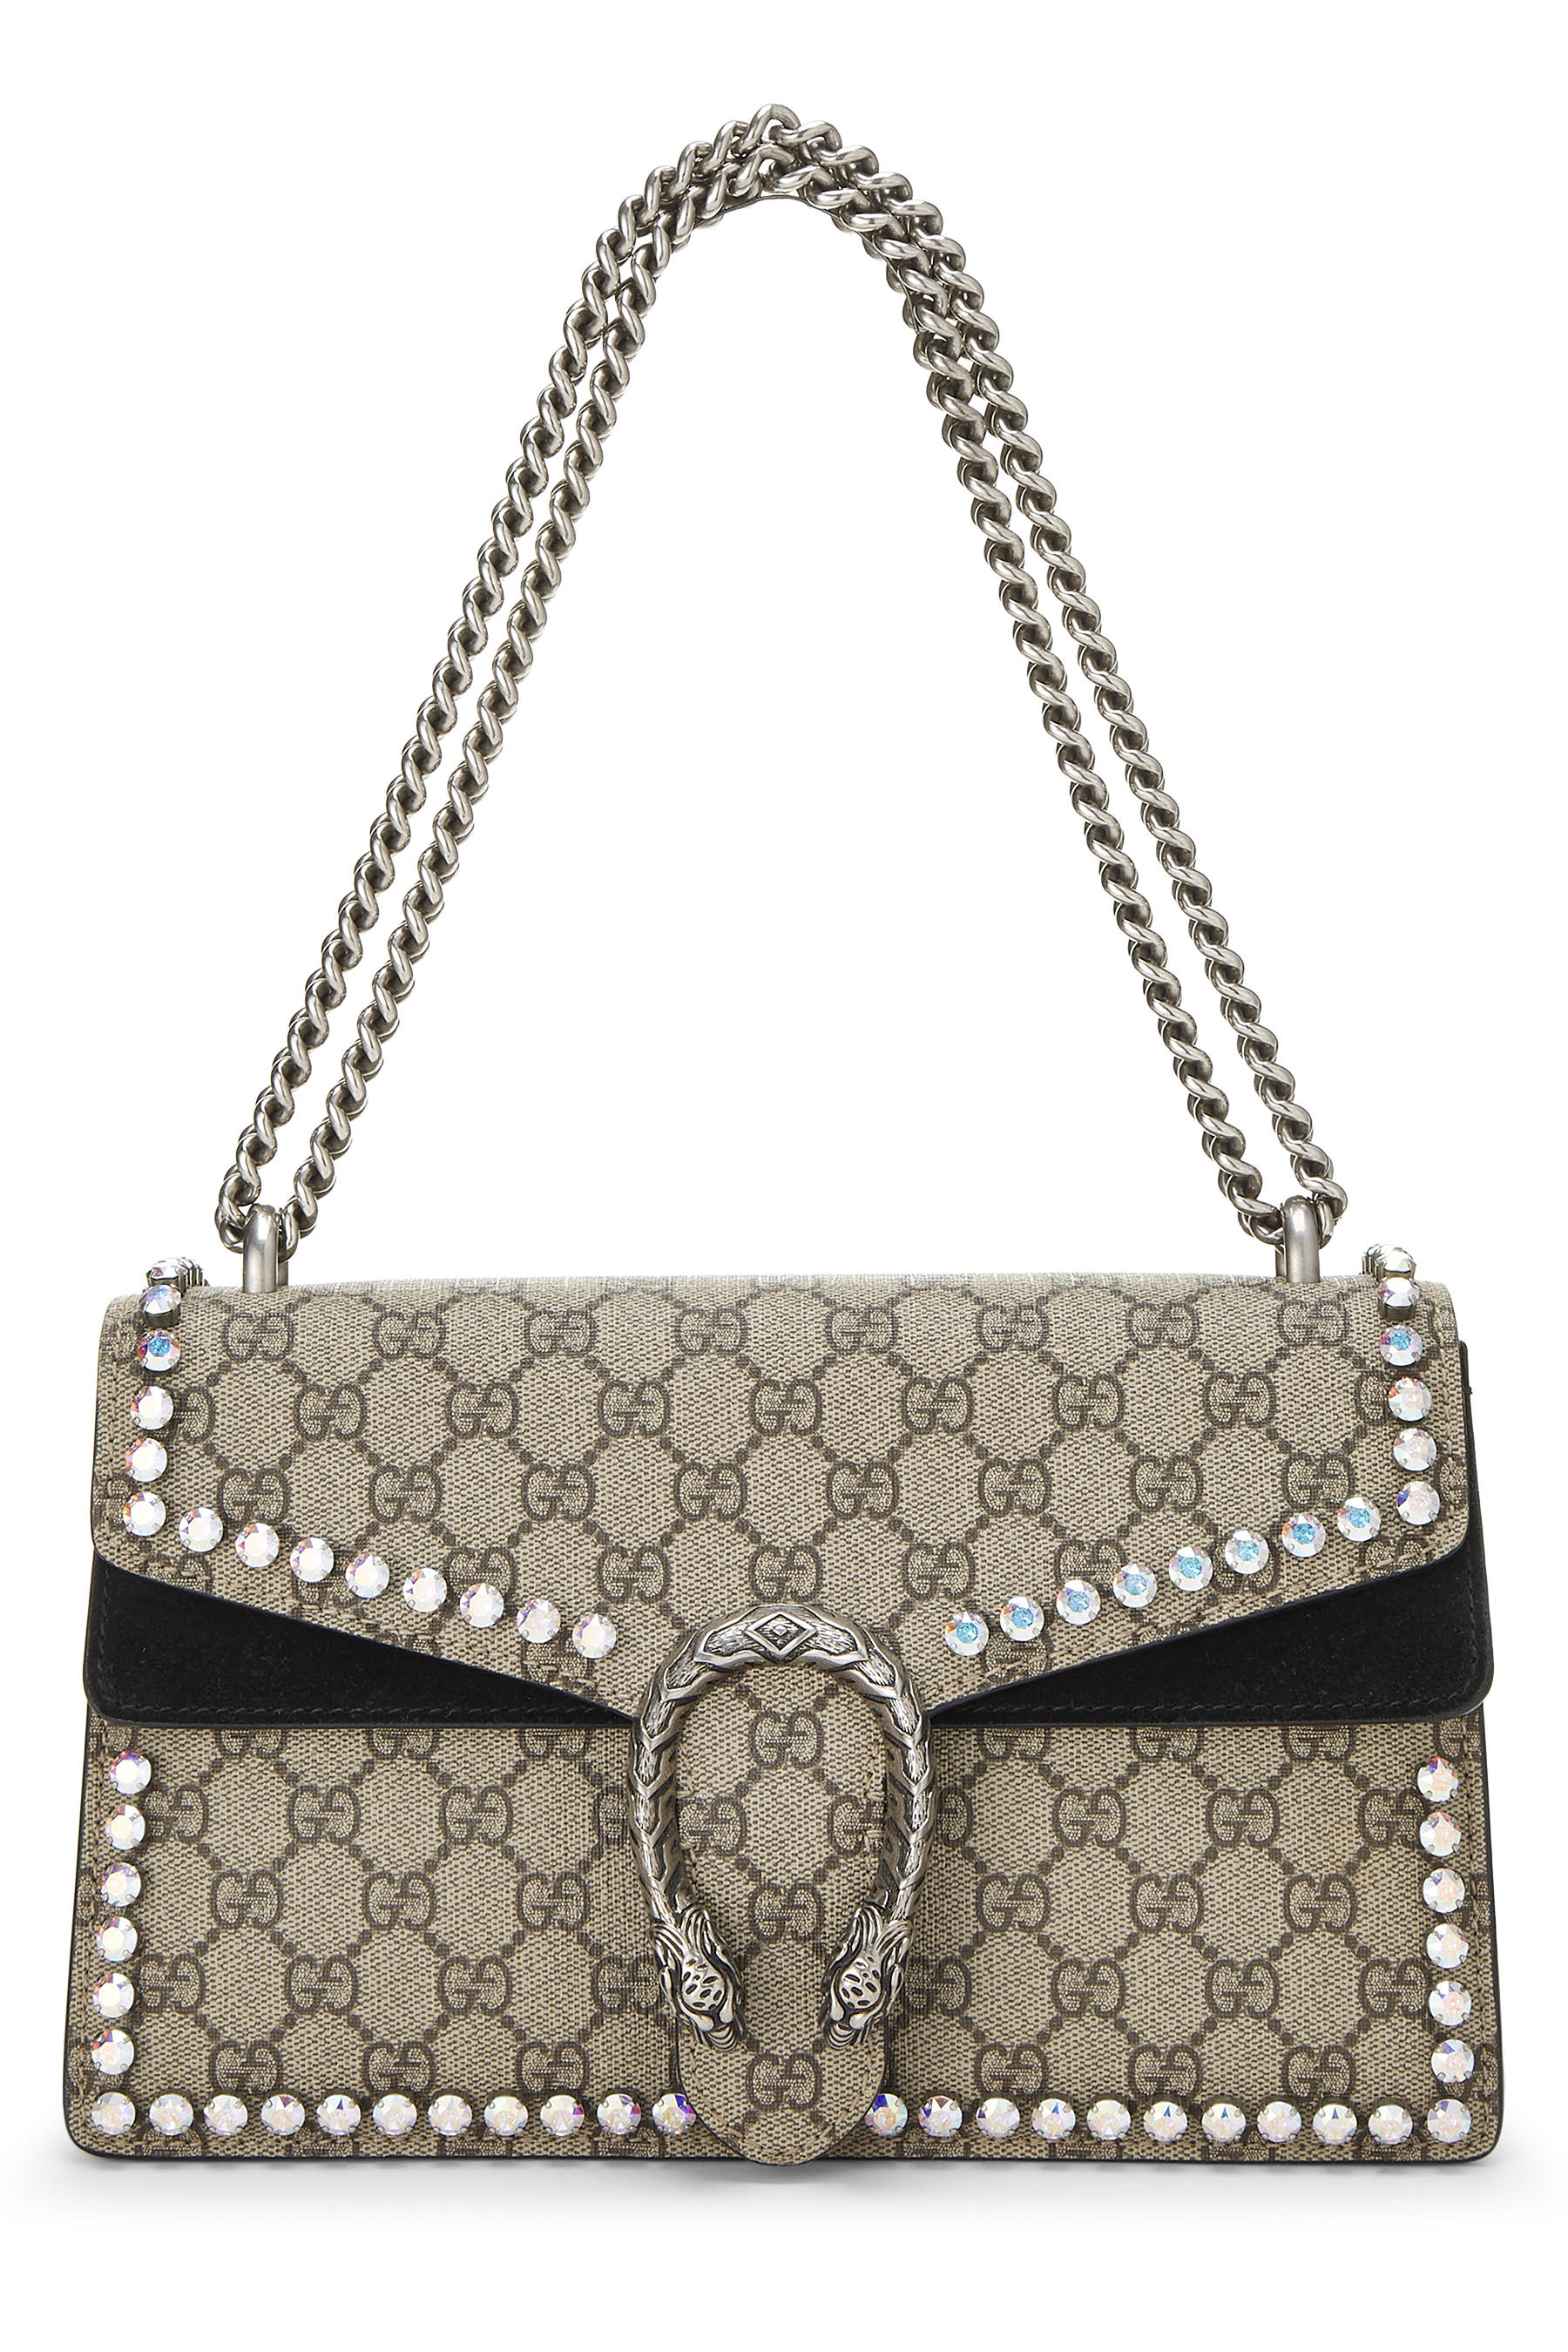 Gucci Dionysus Shoulder Bag GG Supreme Arabesque Medium Yellow/Beige in  Coated Canvas Leather with Silver-tone - US